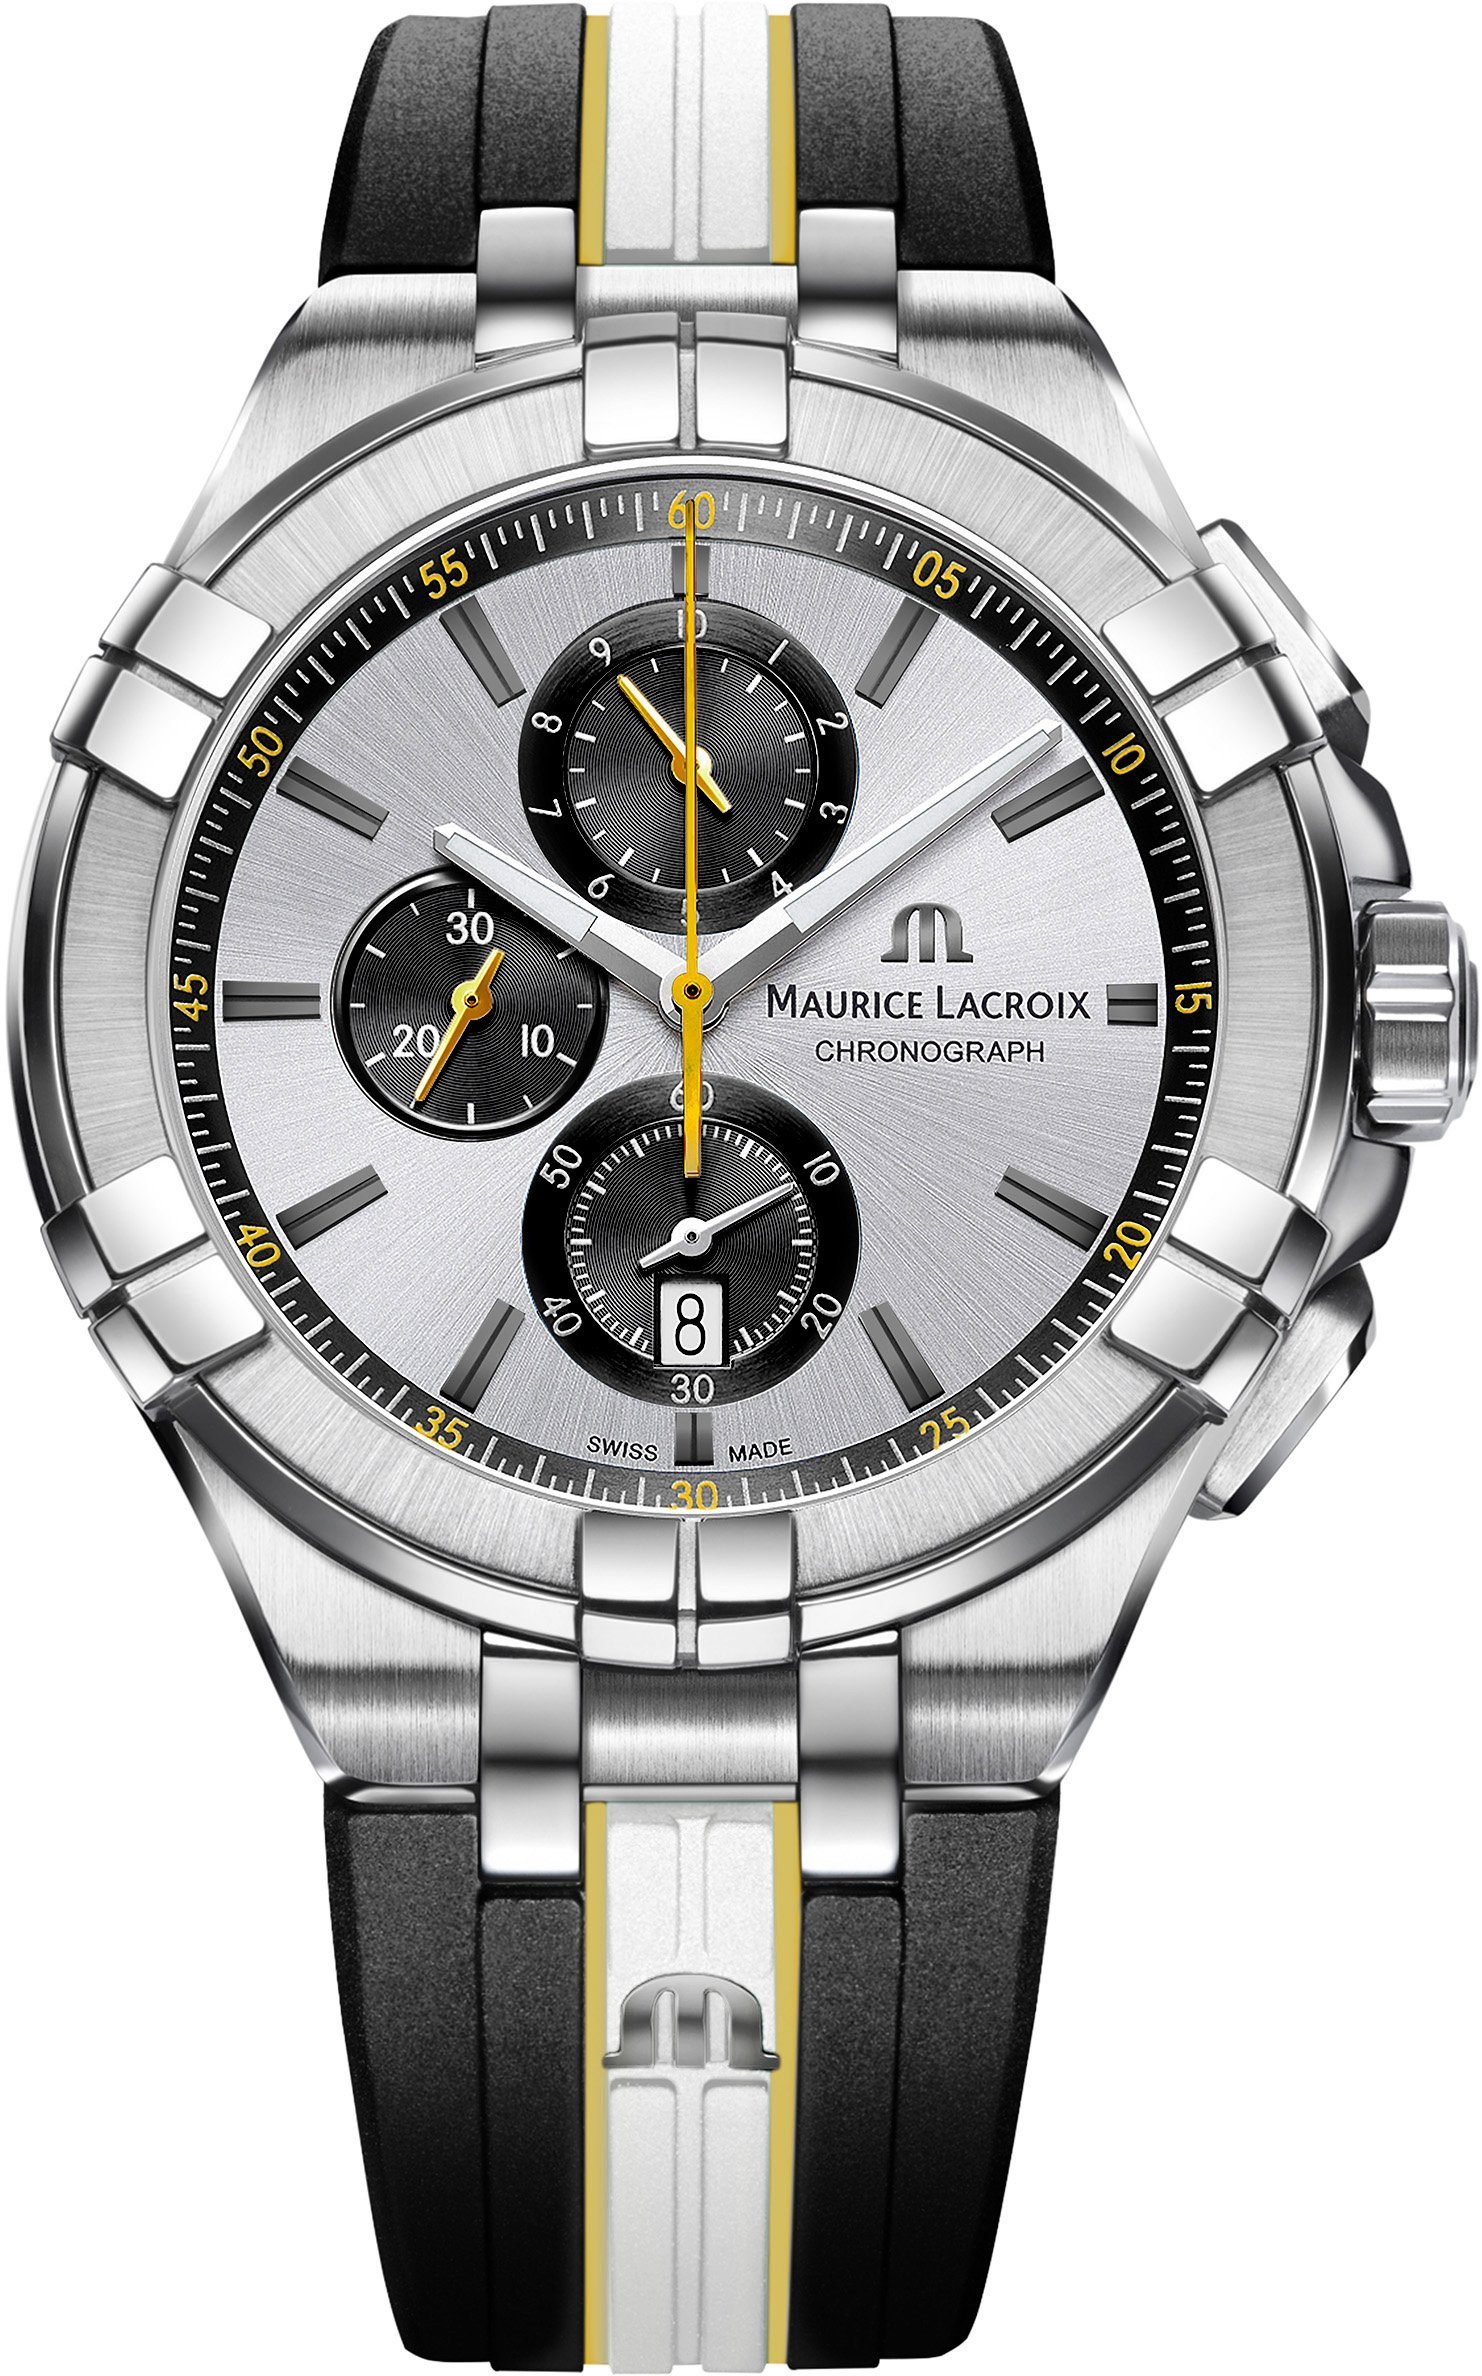 MAURICE AI1018 Aikon Edition Chronograph -TT030-130-K, Court, Chronograph of the LACROIX Special King